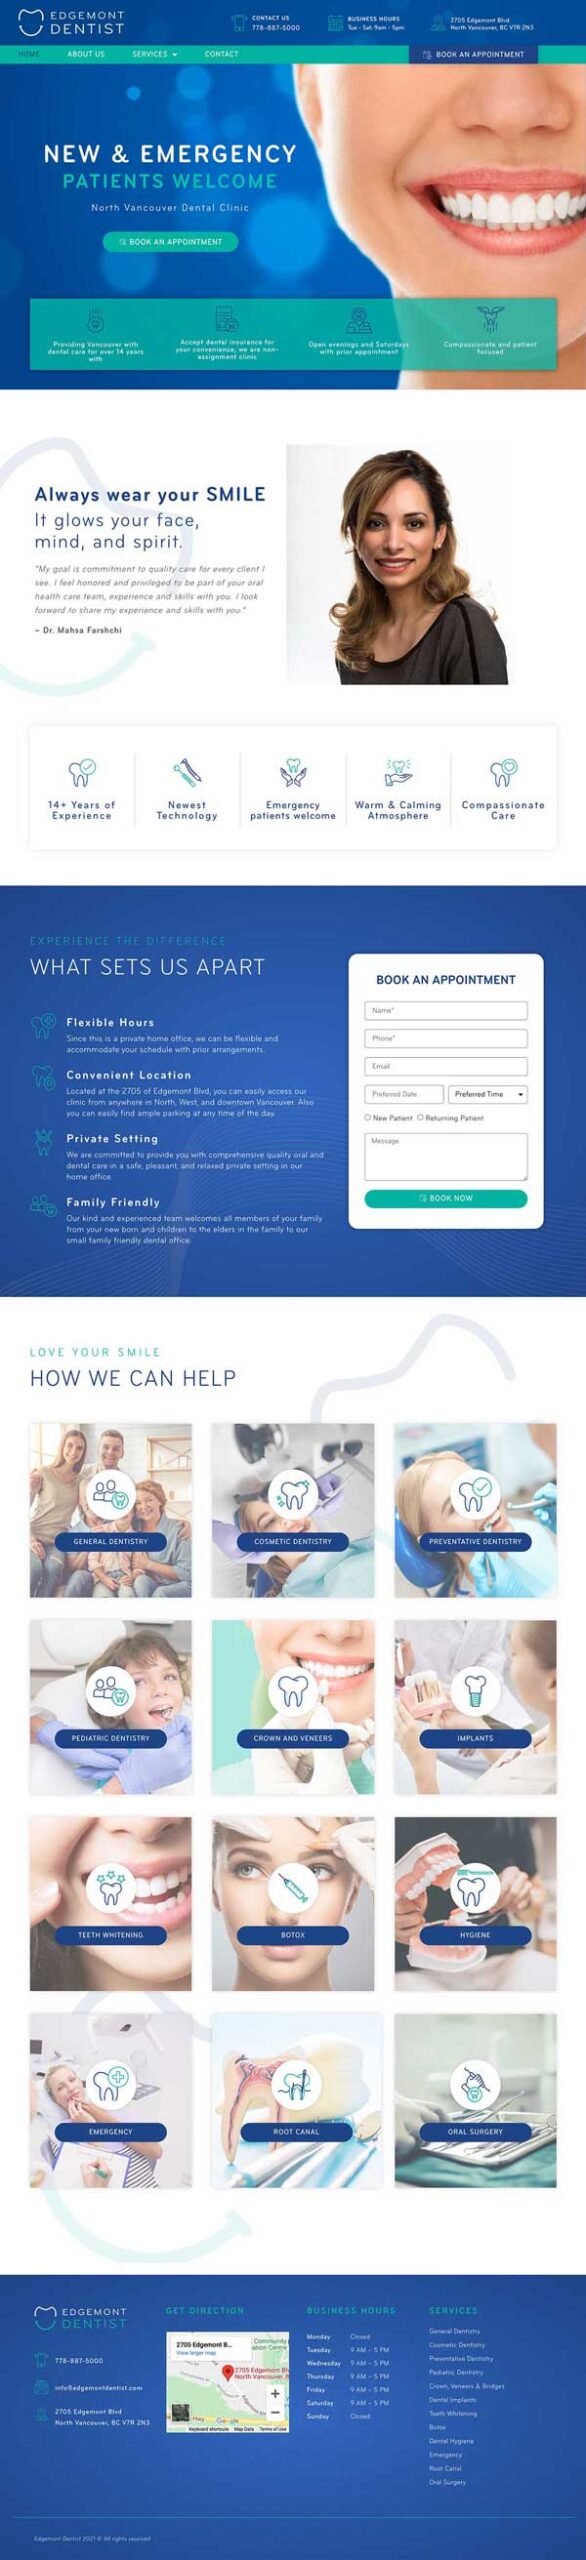 Web Design And Development For Edgemont Dental Clinic North Vancouver